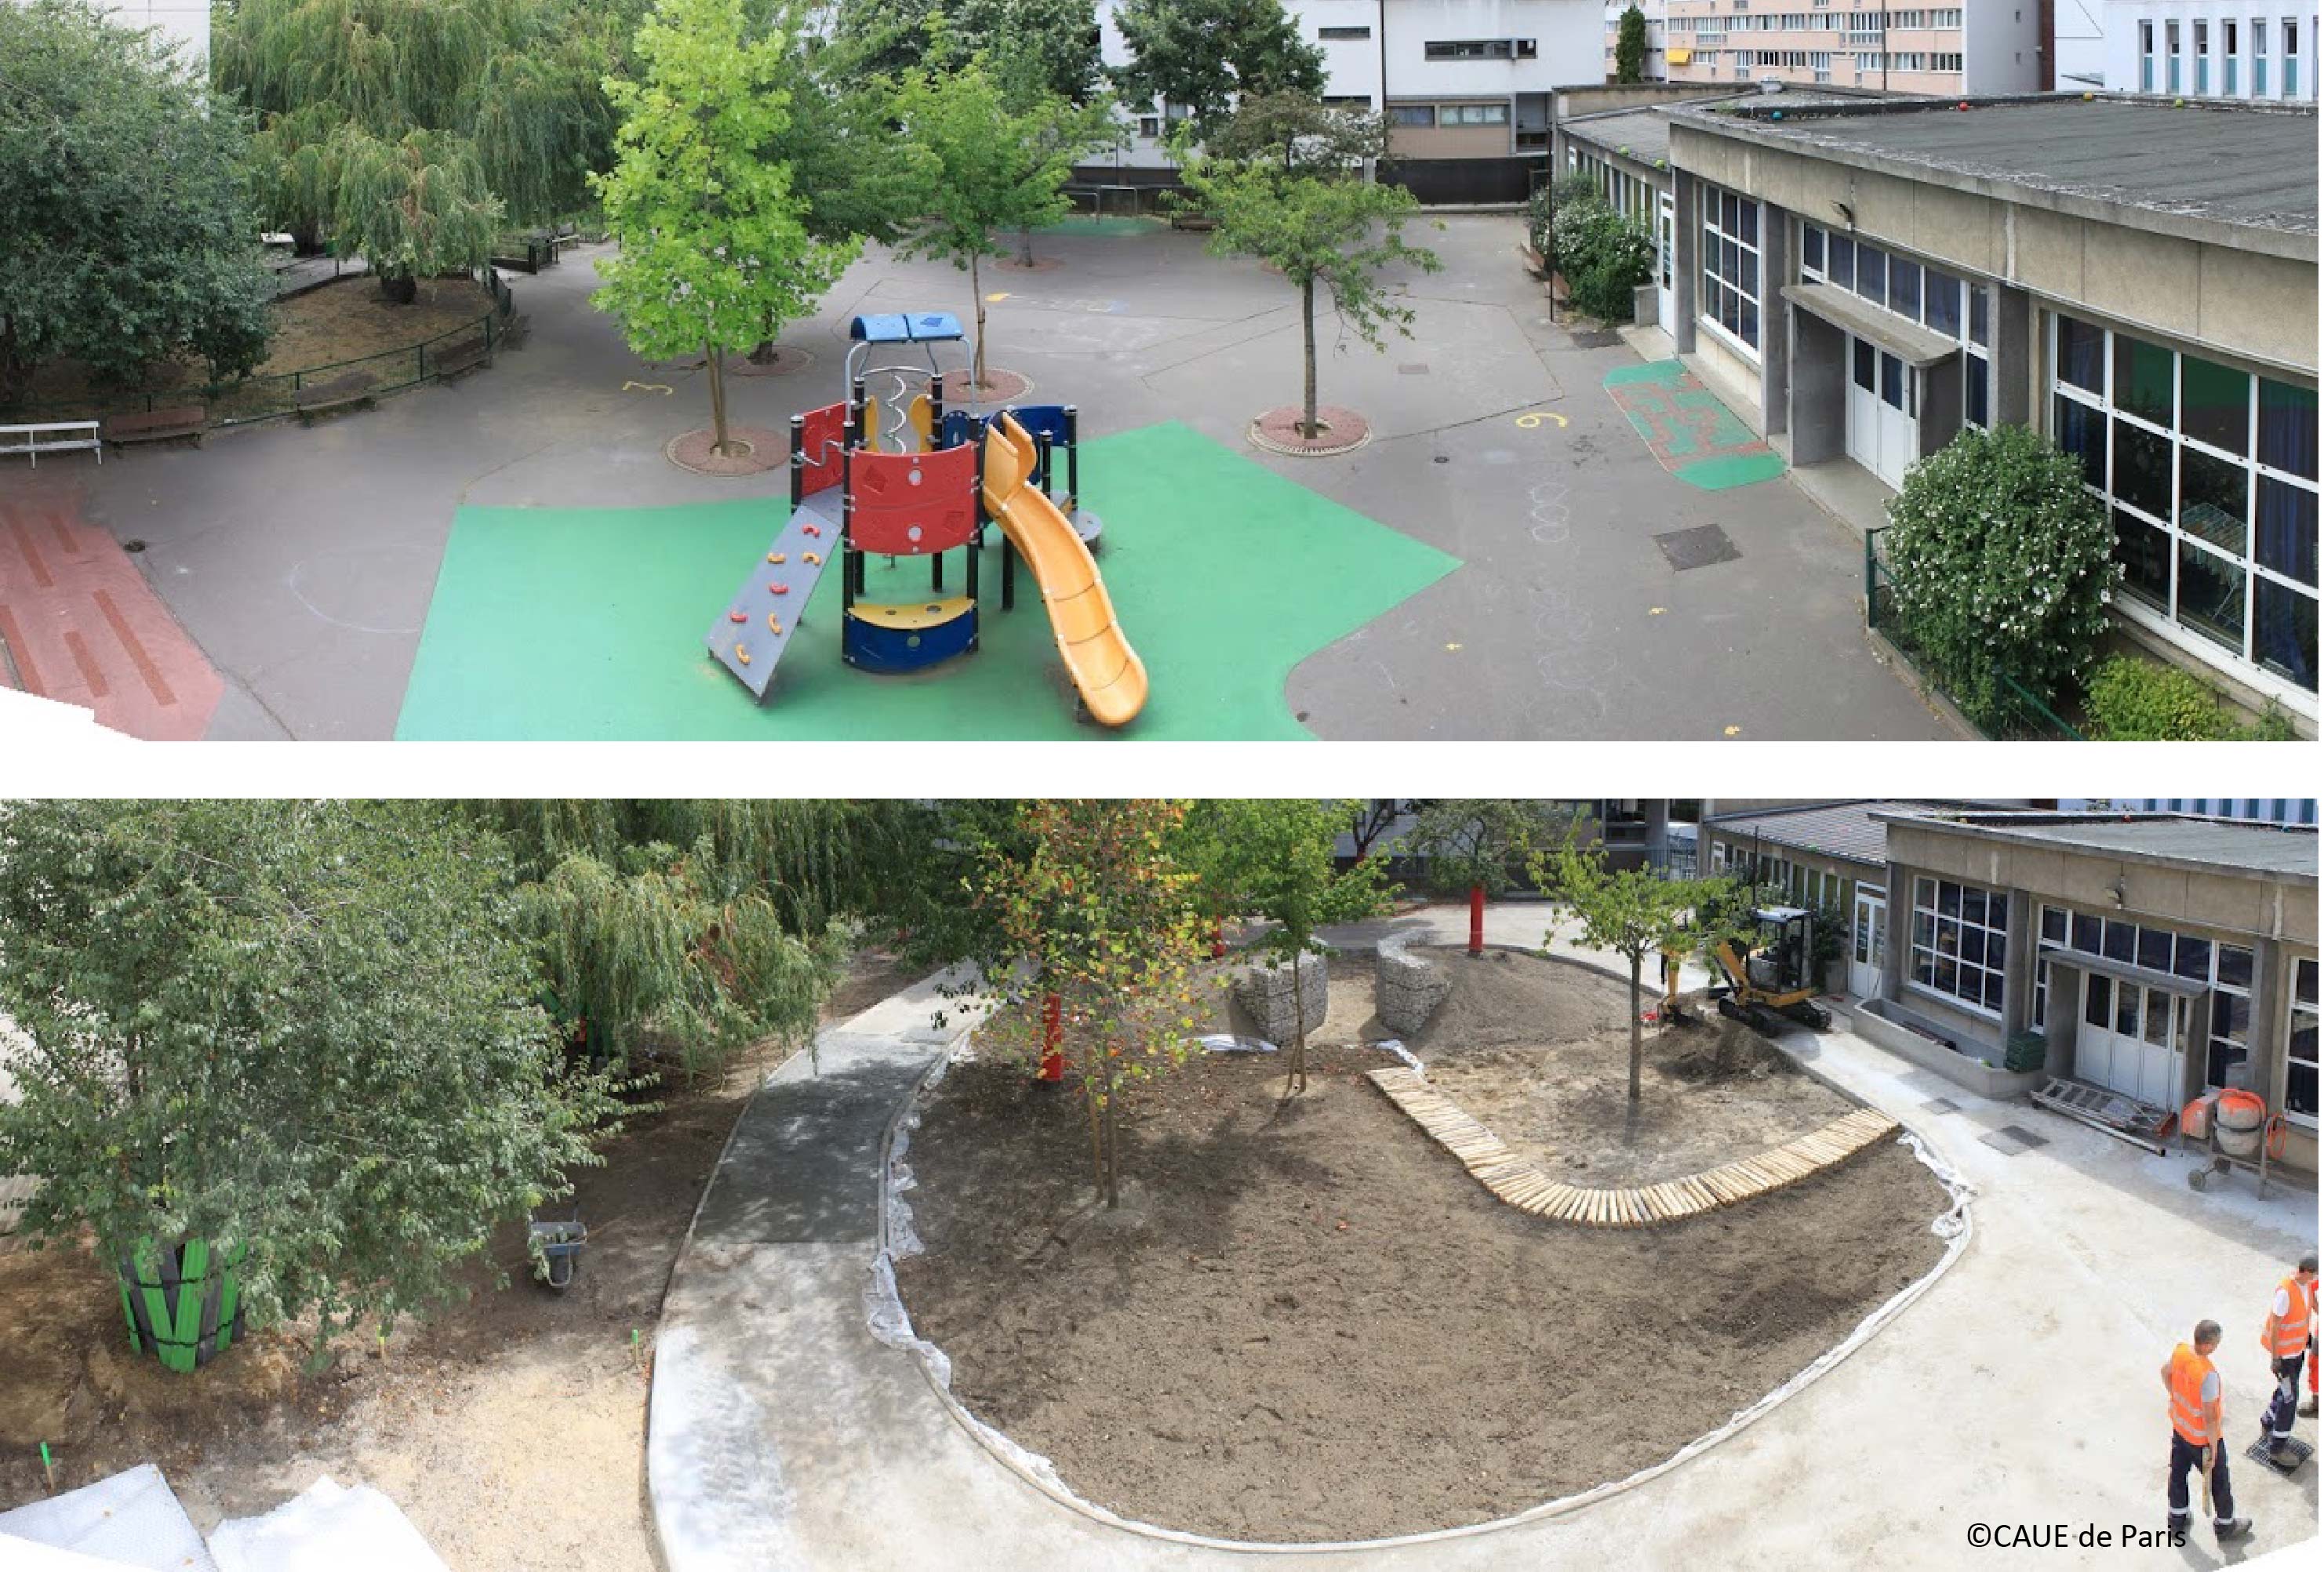 Schoolyards before and after the OASIS tranformation